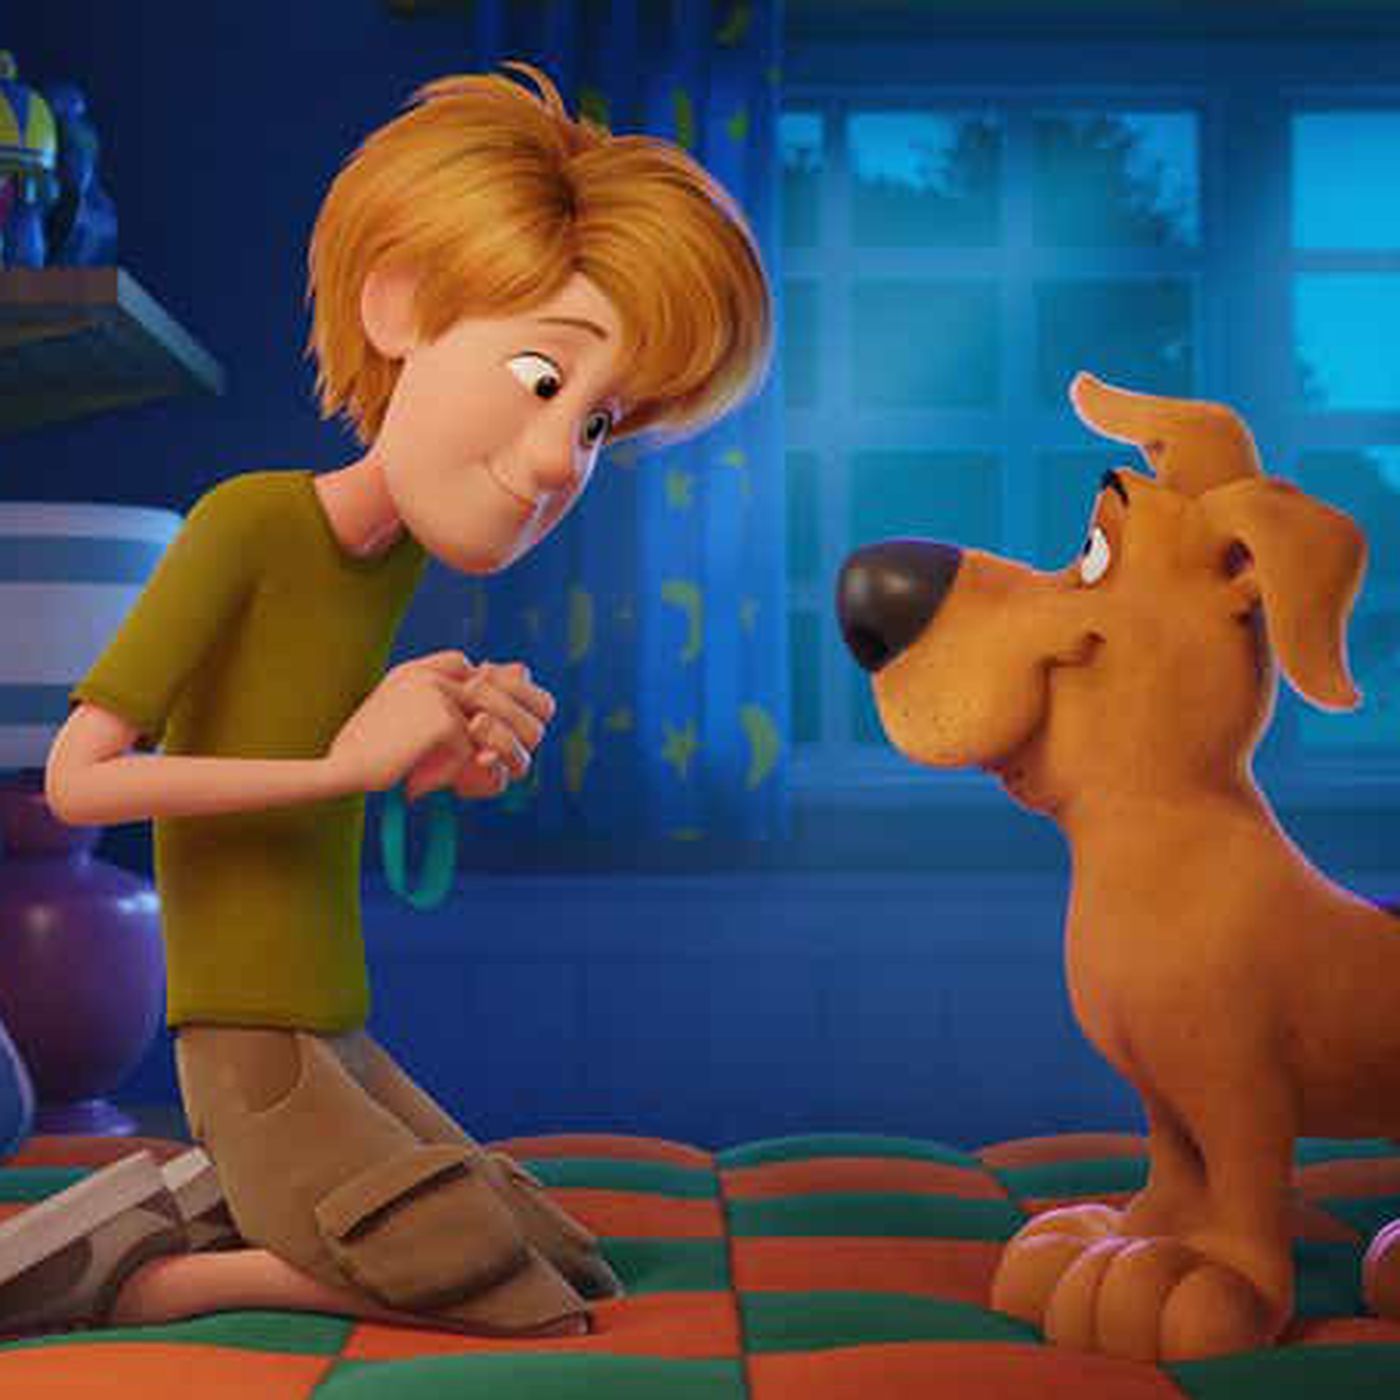 New Scooby Doo Film Becomes Latest Major Release To Skip Theatres